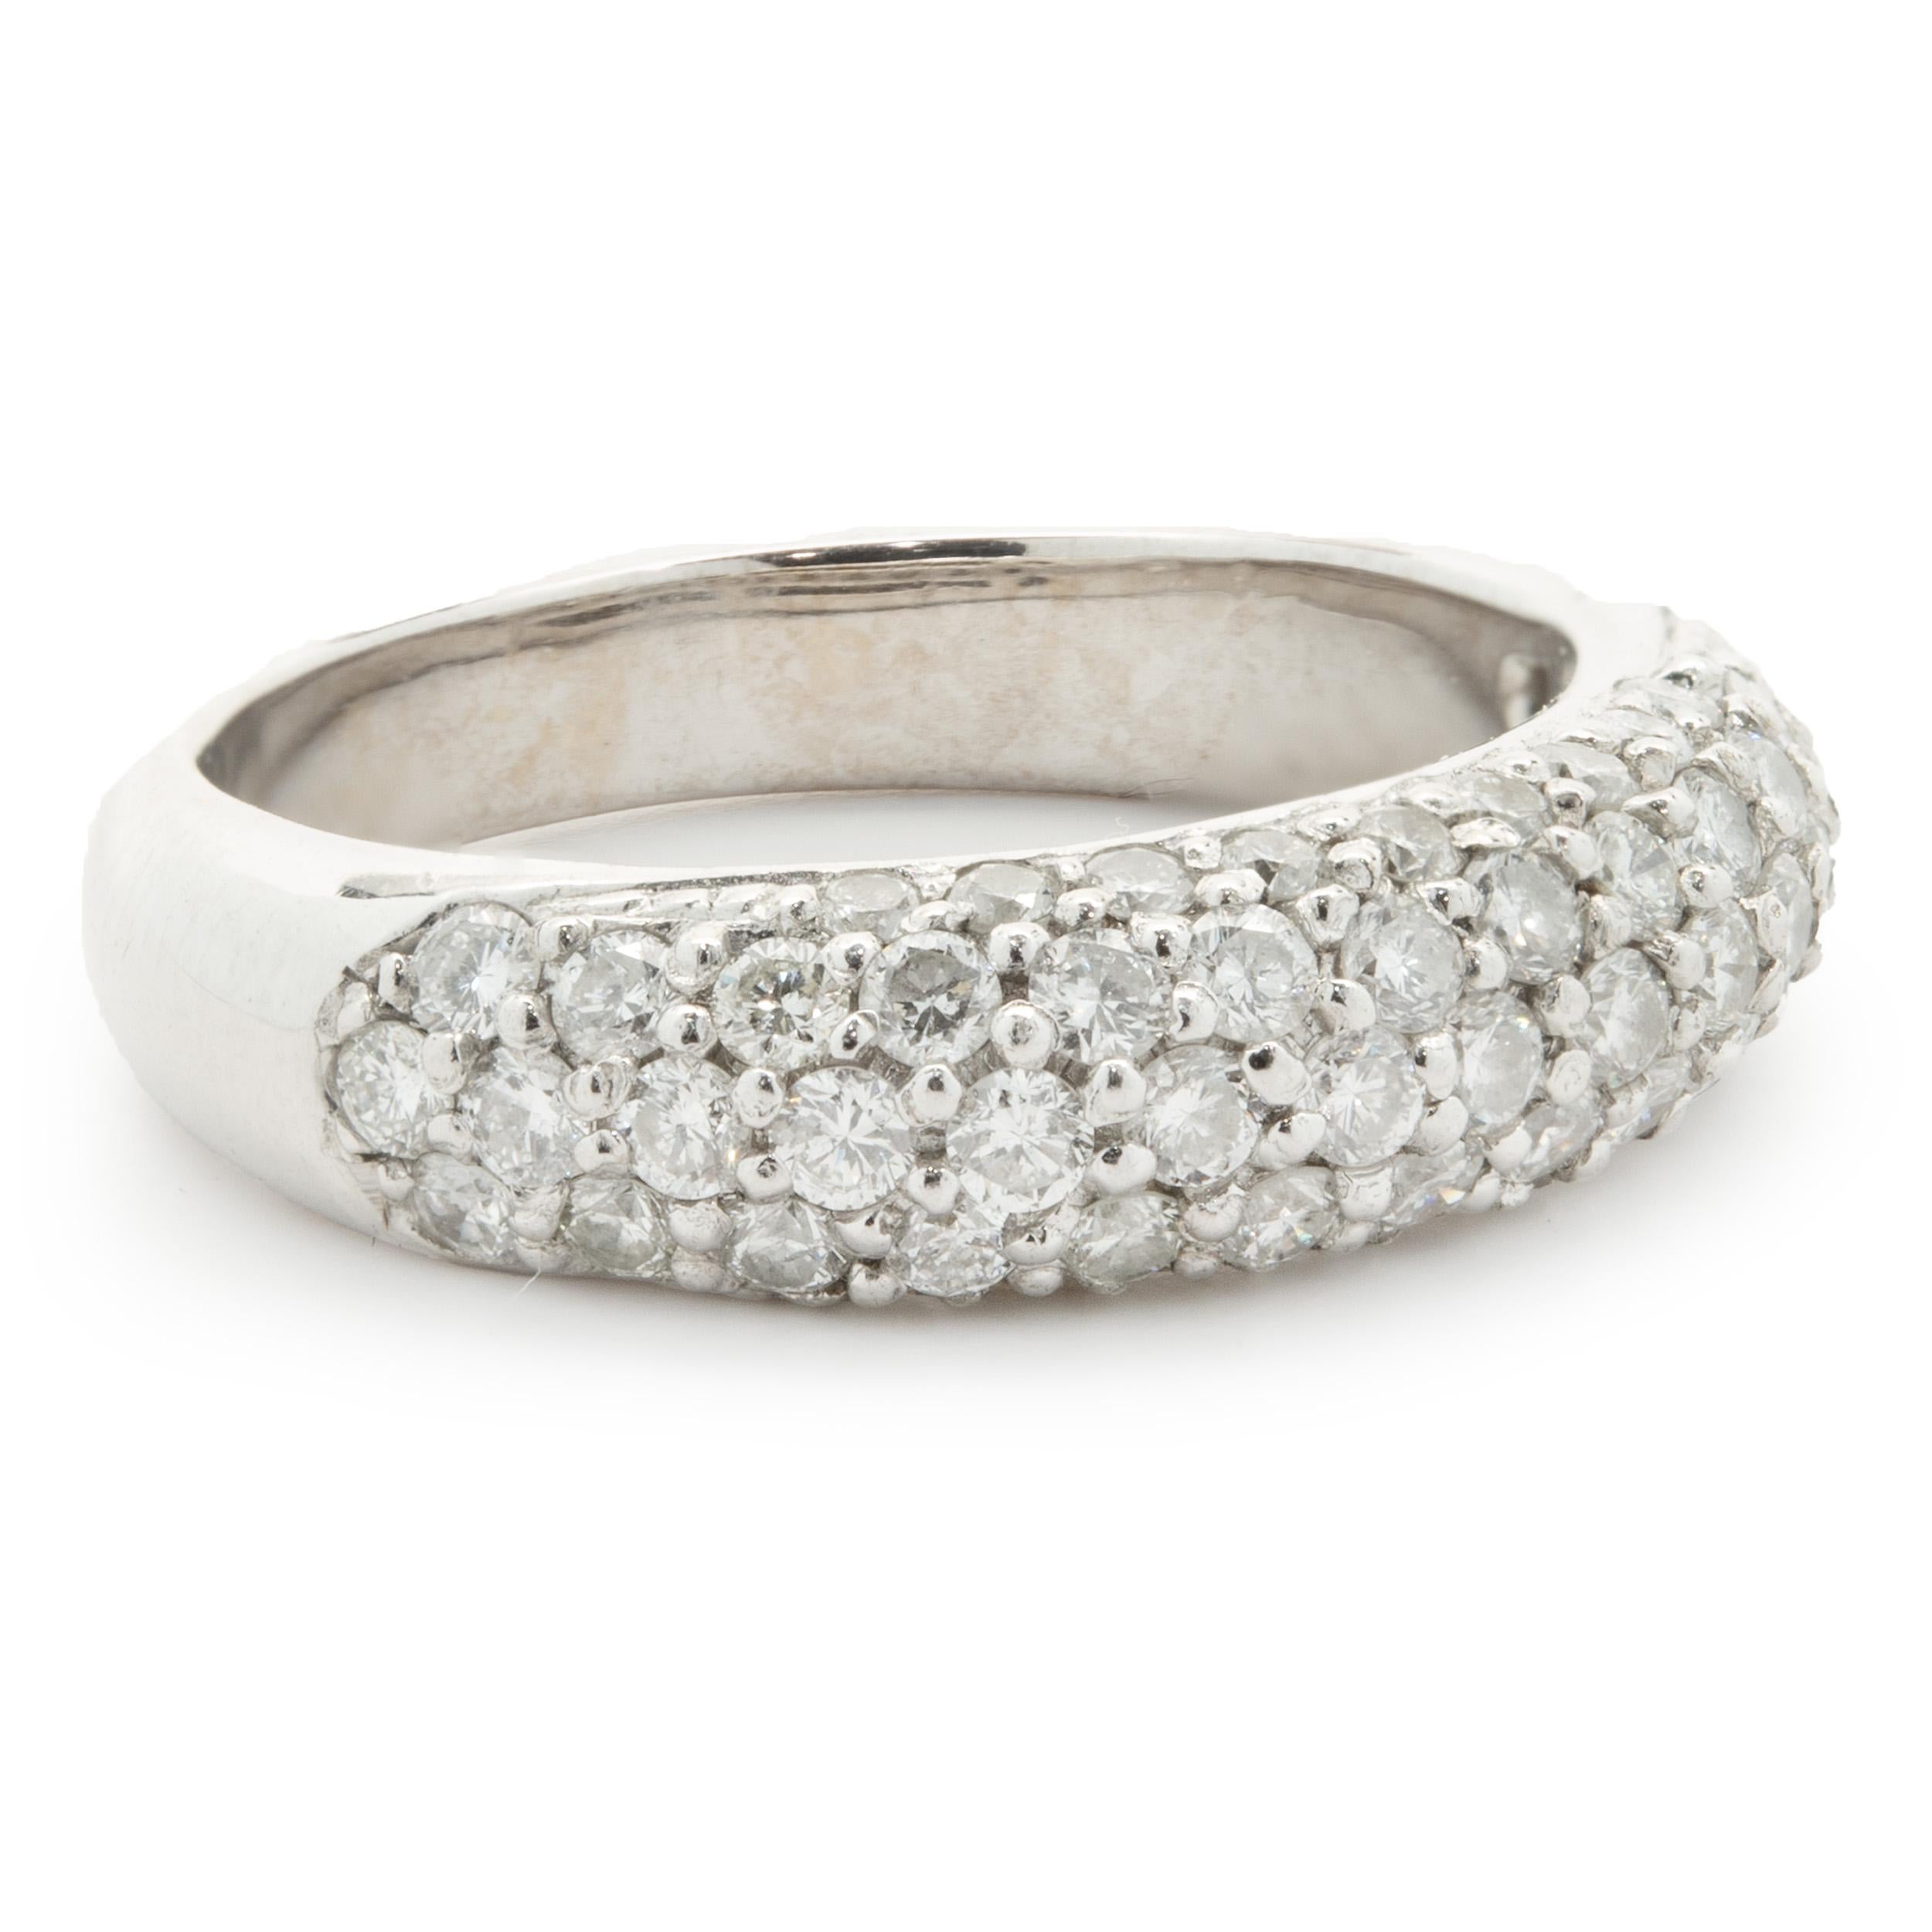 14 Karat White Gold Pave Diamond Band In Excellent Condition For Sale In Scottsdale, AZ